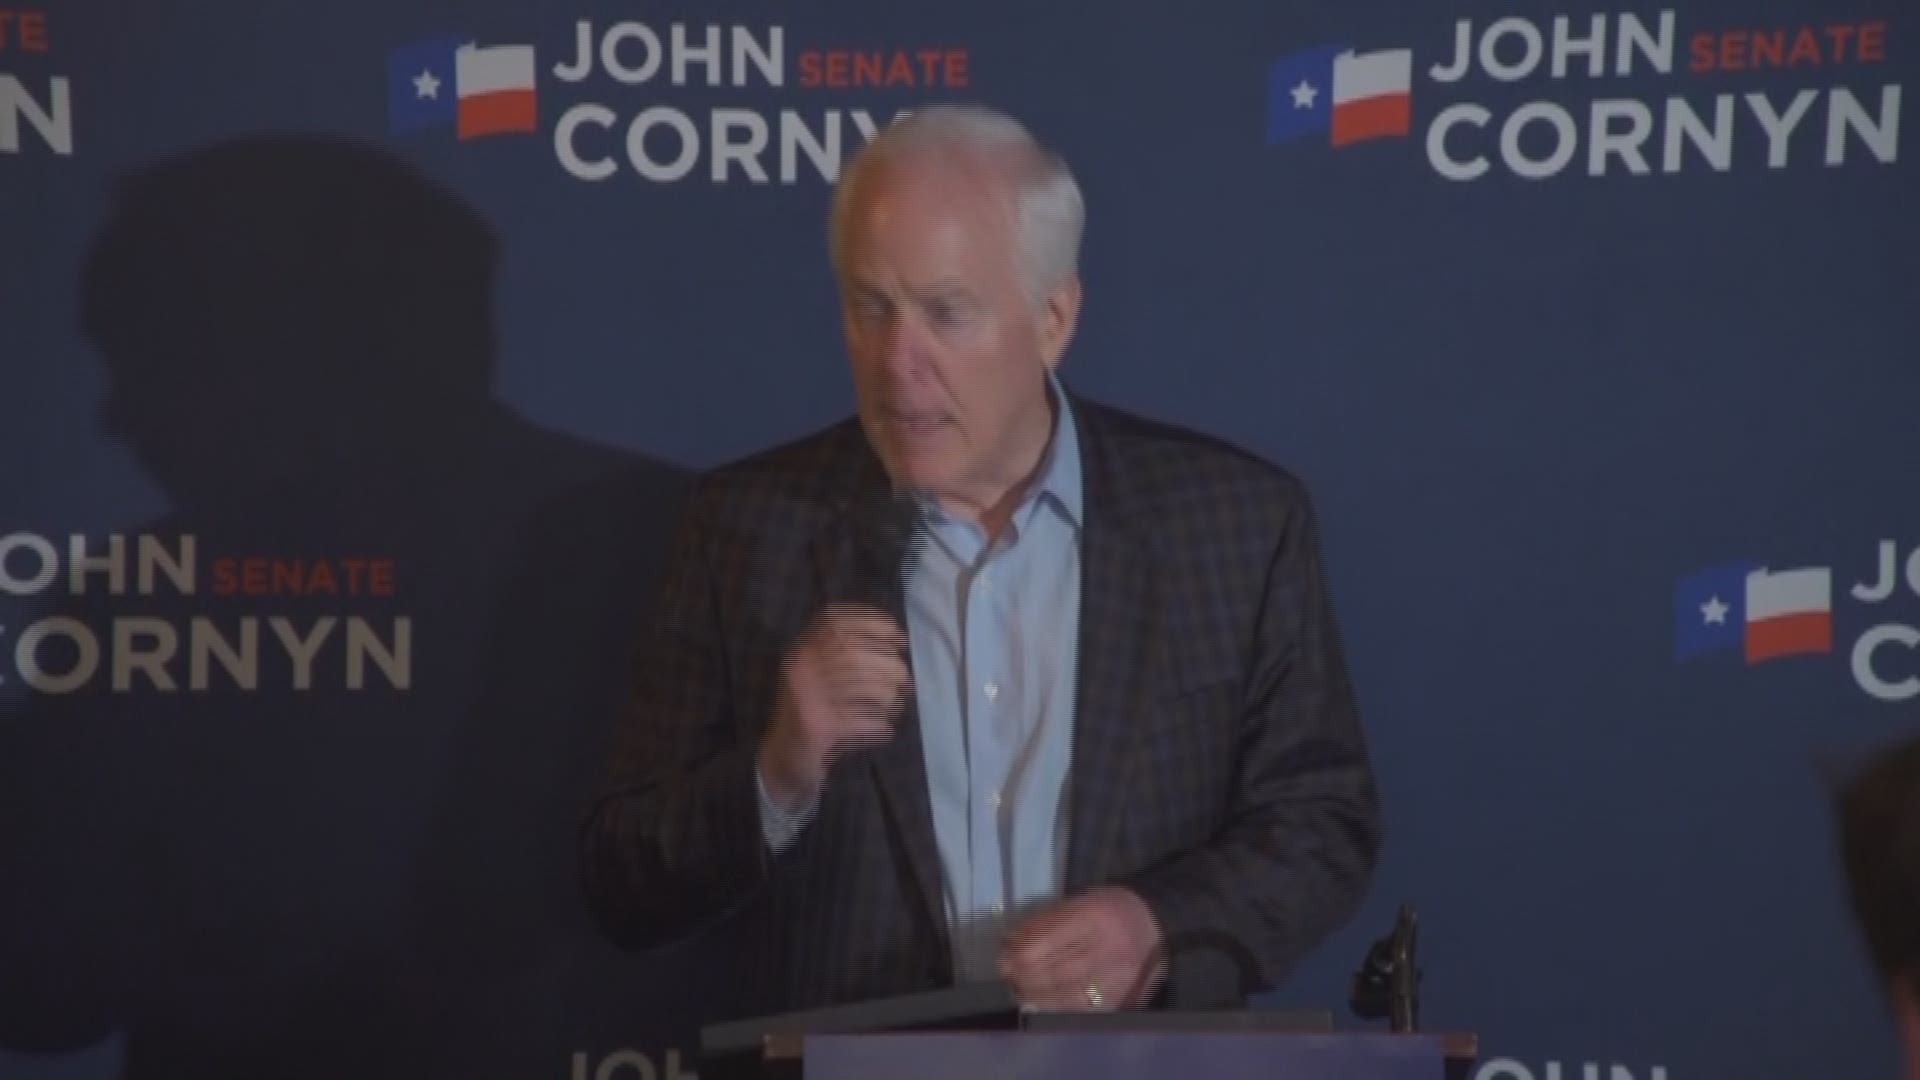 Sen. John Cornyn thanked his supporters on Super Tuesday in Austin after winning the Republican Senate primary.